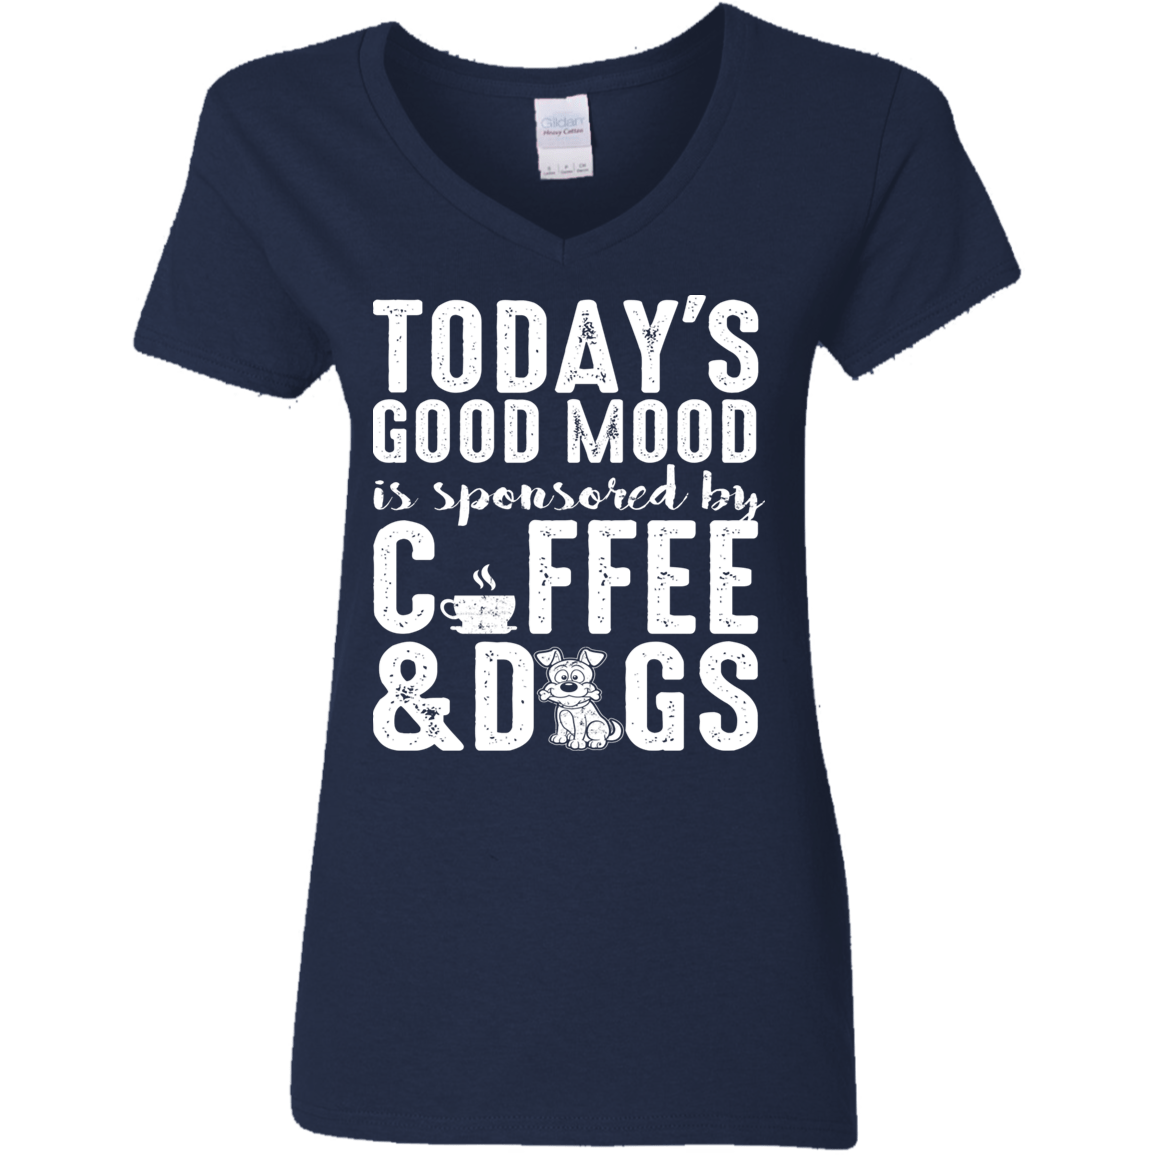 Today's Good Mood Coffee & Dogs - Ladies V Neck.